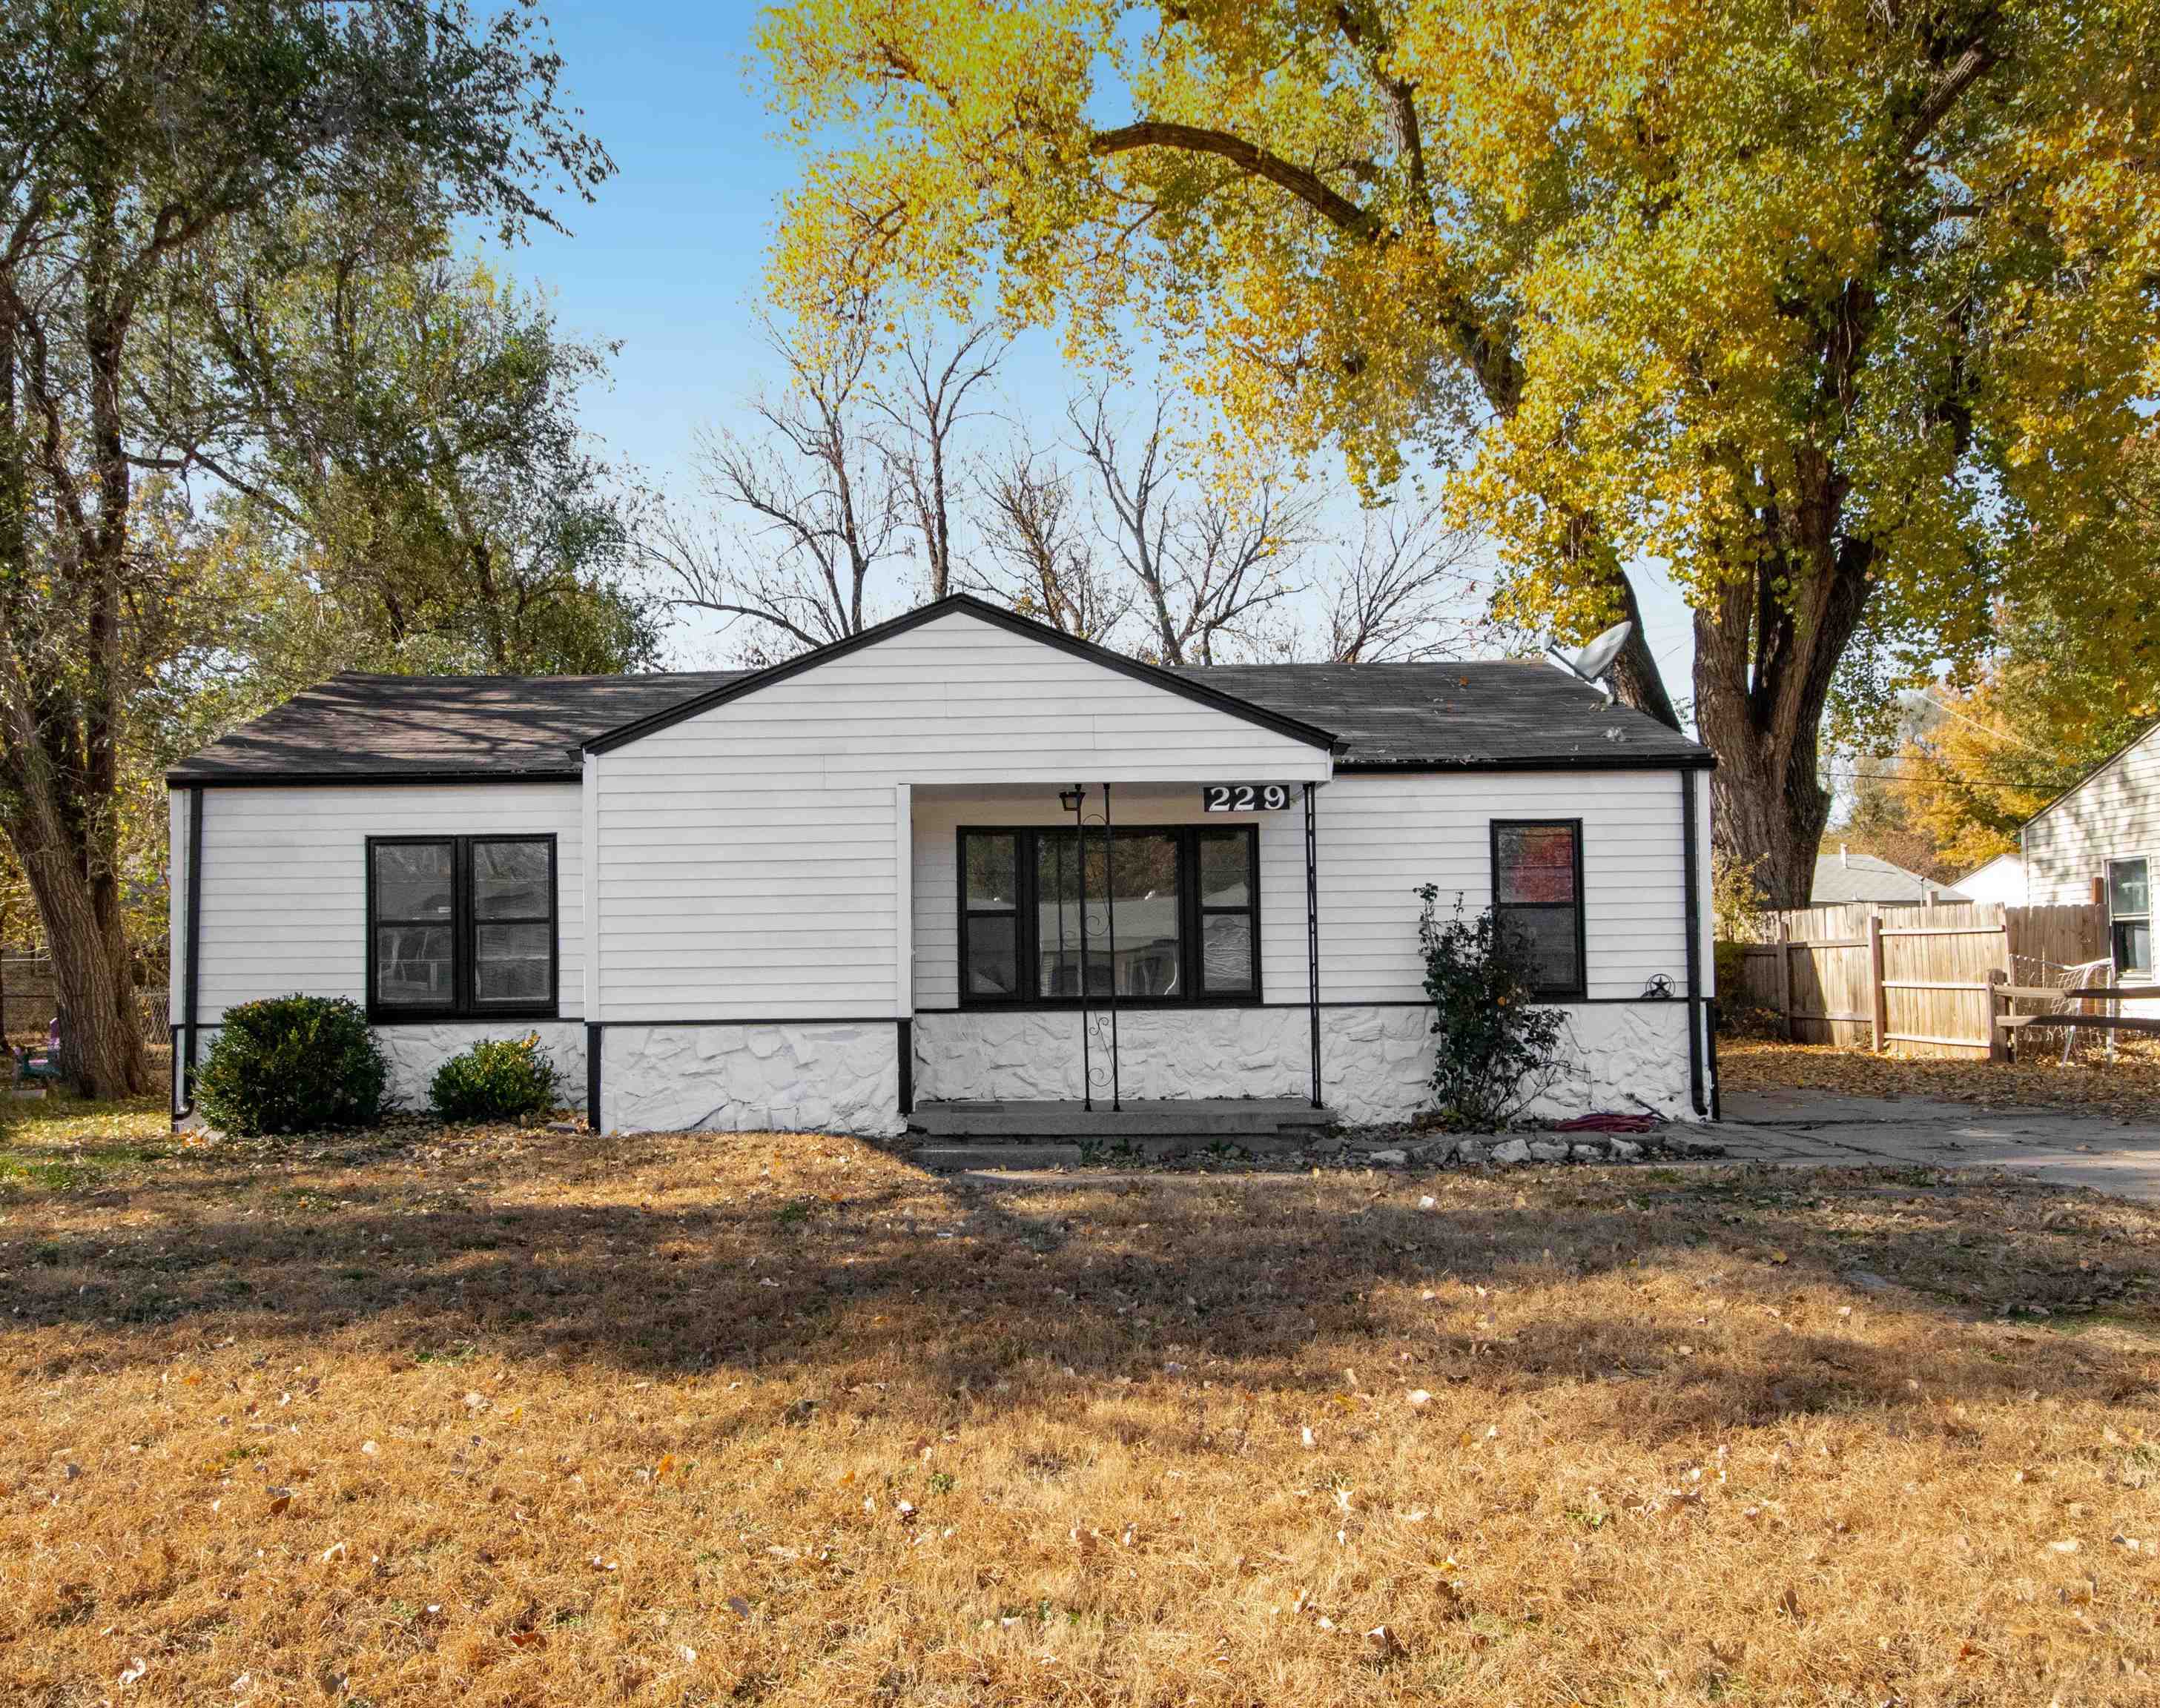 This newly renovated home is ready for your family! Within this 3 bedroom, 1 bath home, you get to e